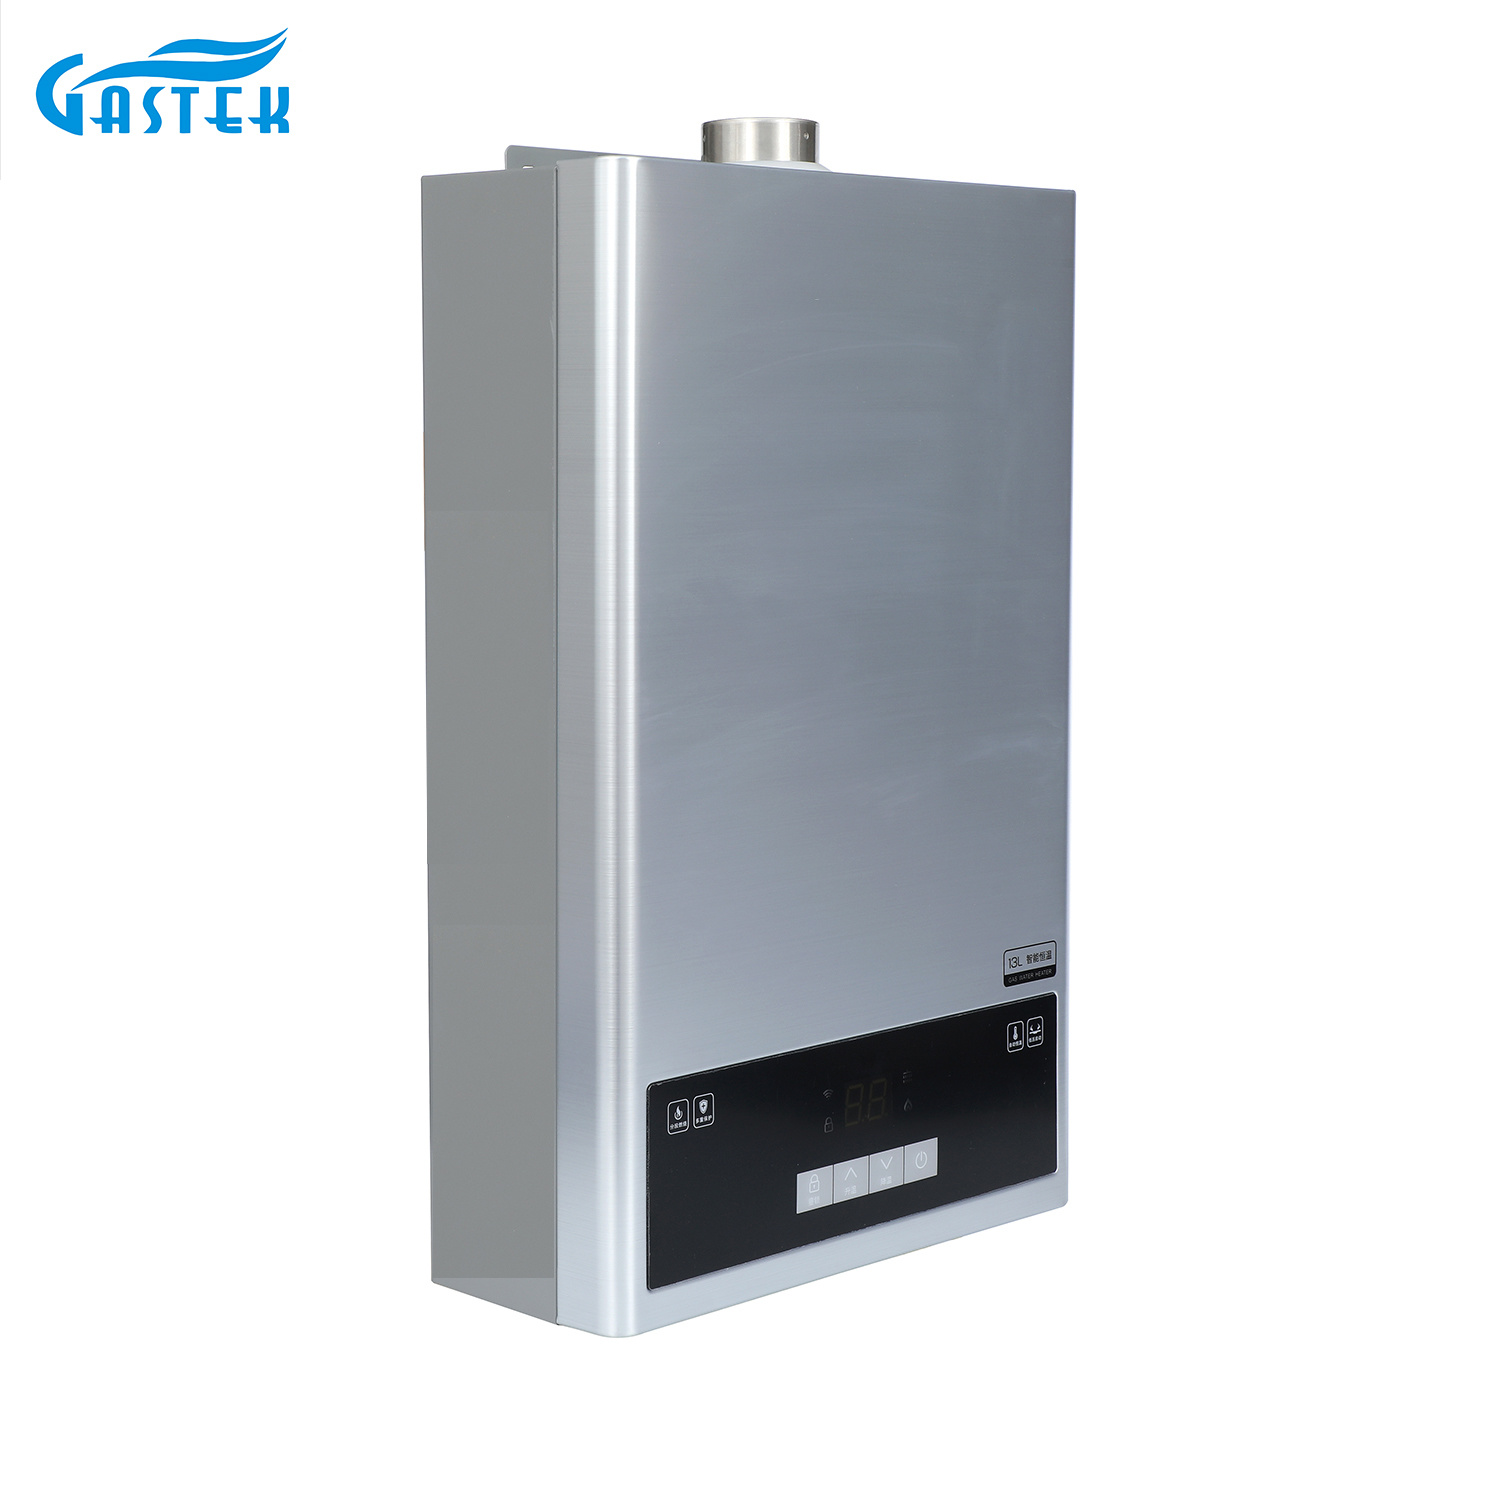 Electricity 220V 110V LCD Panel Forced Type Constant Temperature Gas Water Heater for Bathroom